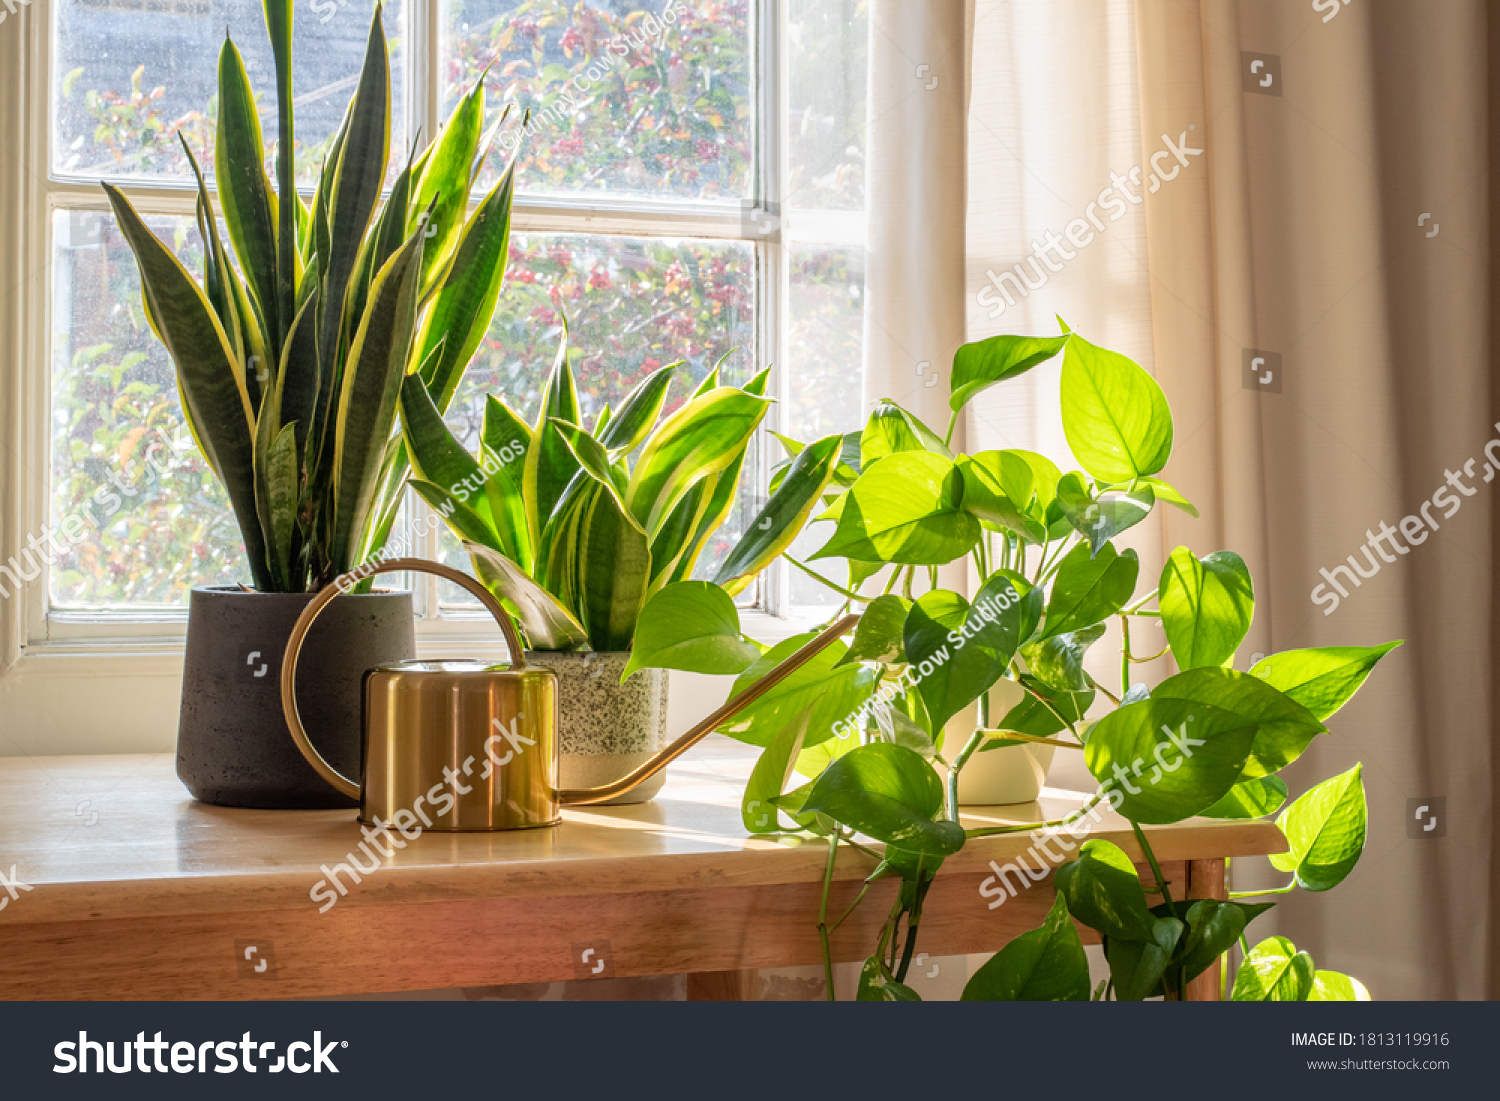 A sansevieria trifasciata snake plant in the window of a modern home or apartment interior. #1813119916